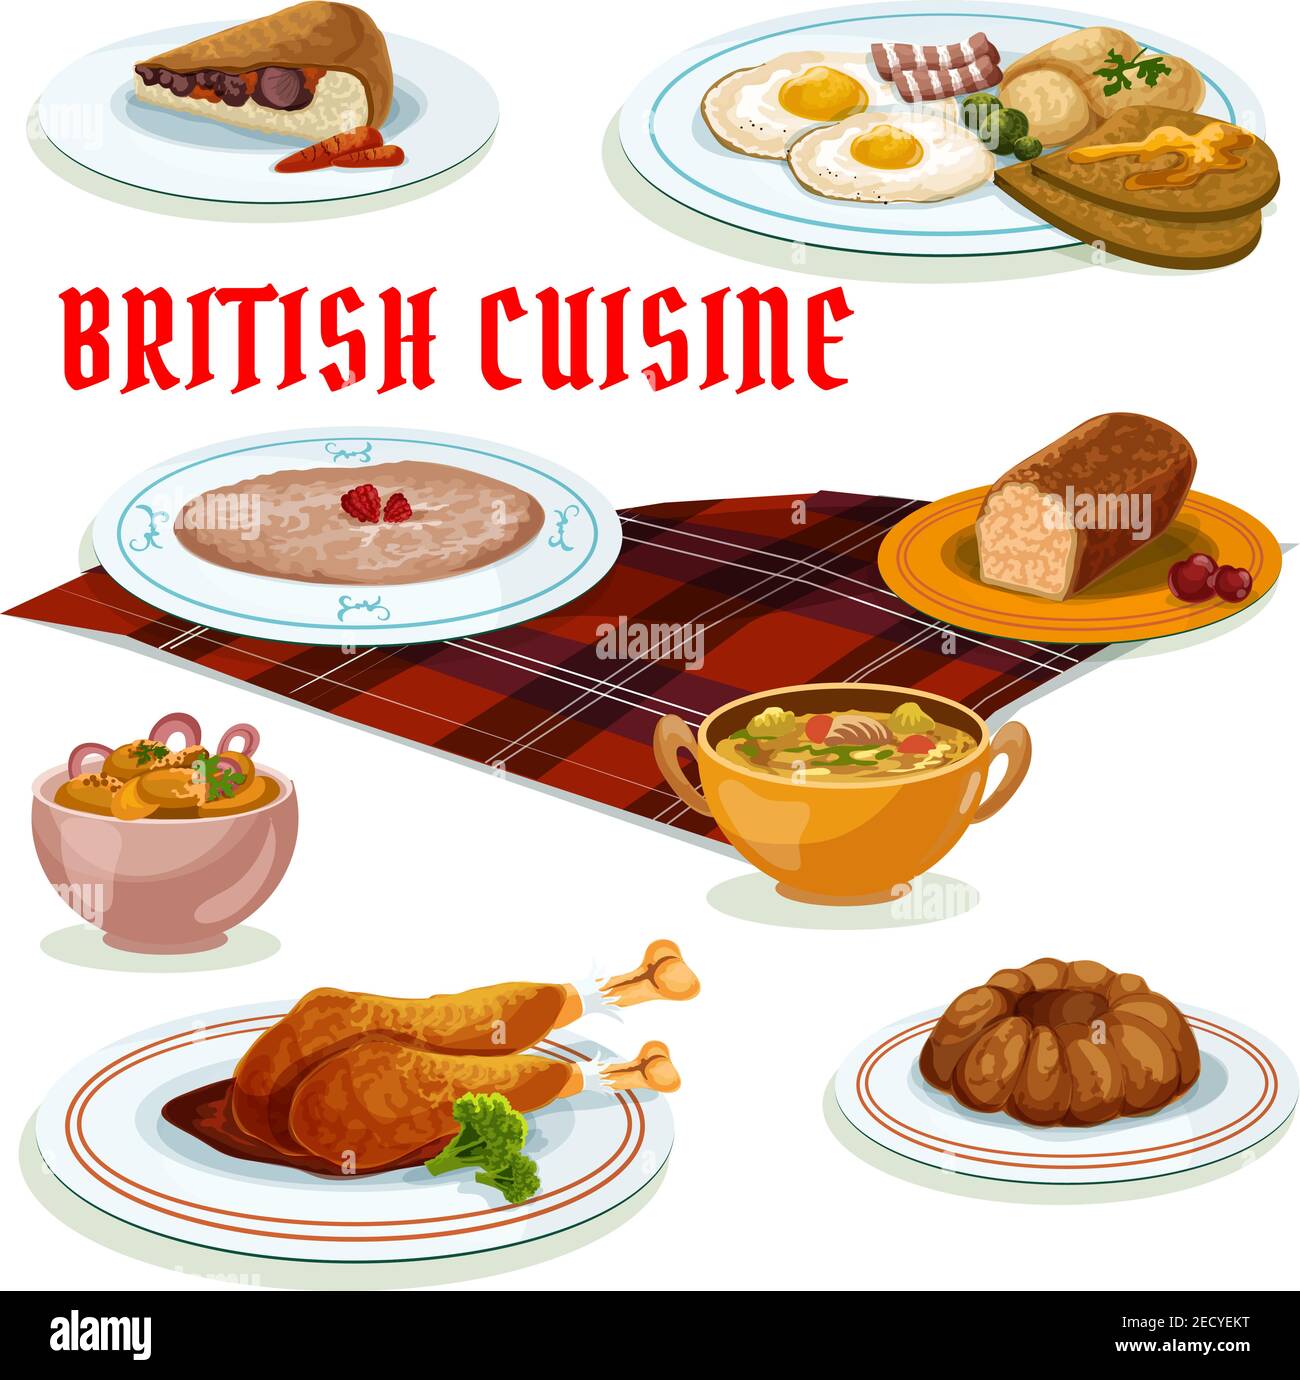 British cuisine breakfast menu icon with fried egg, bacon and toast, gingerbread cake, pudding, oatmeal porridge, beef kidney pie, turkey leg in berry Stock Vector